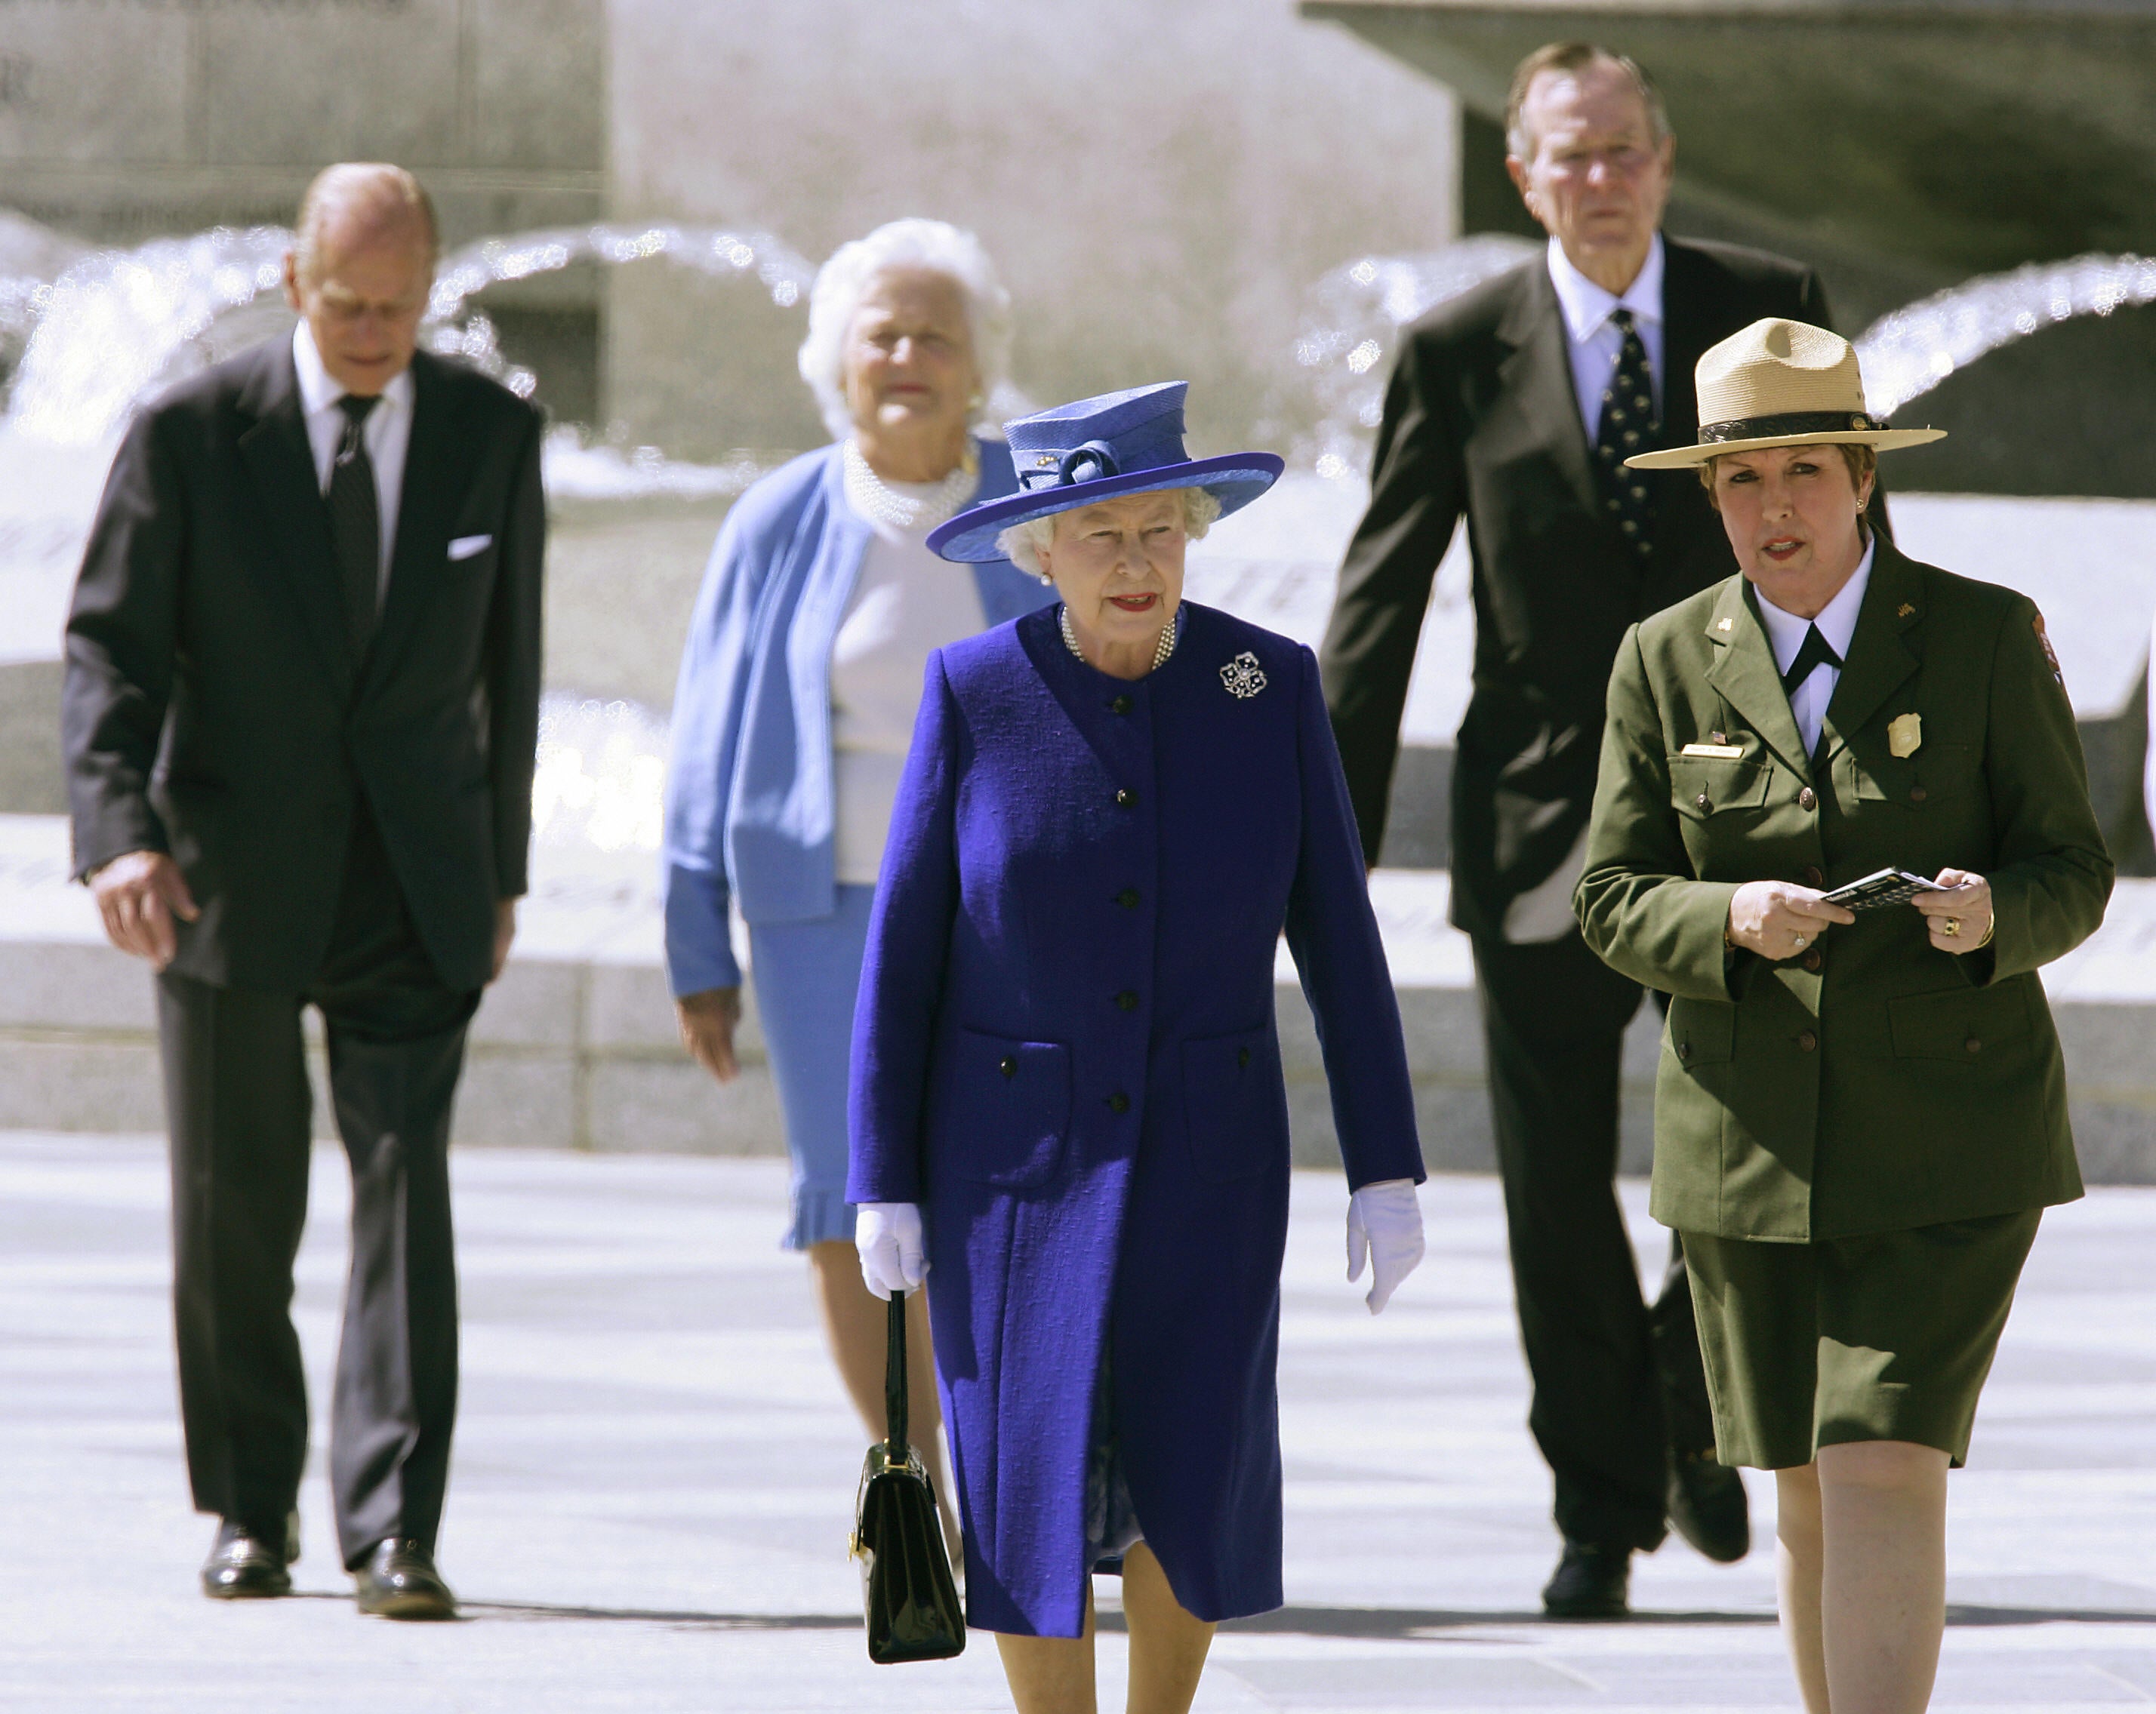 The Queen and Prince Philip with former president George HW Bush, former first lady Barbara, and United States Park Service director Mary Bomaras, during a visit to the World War II Memorial in Washington DC, in May 2007